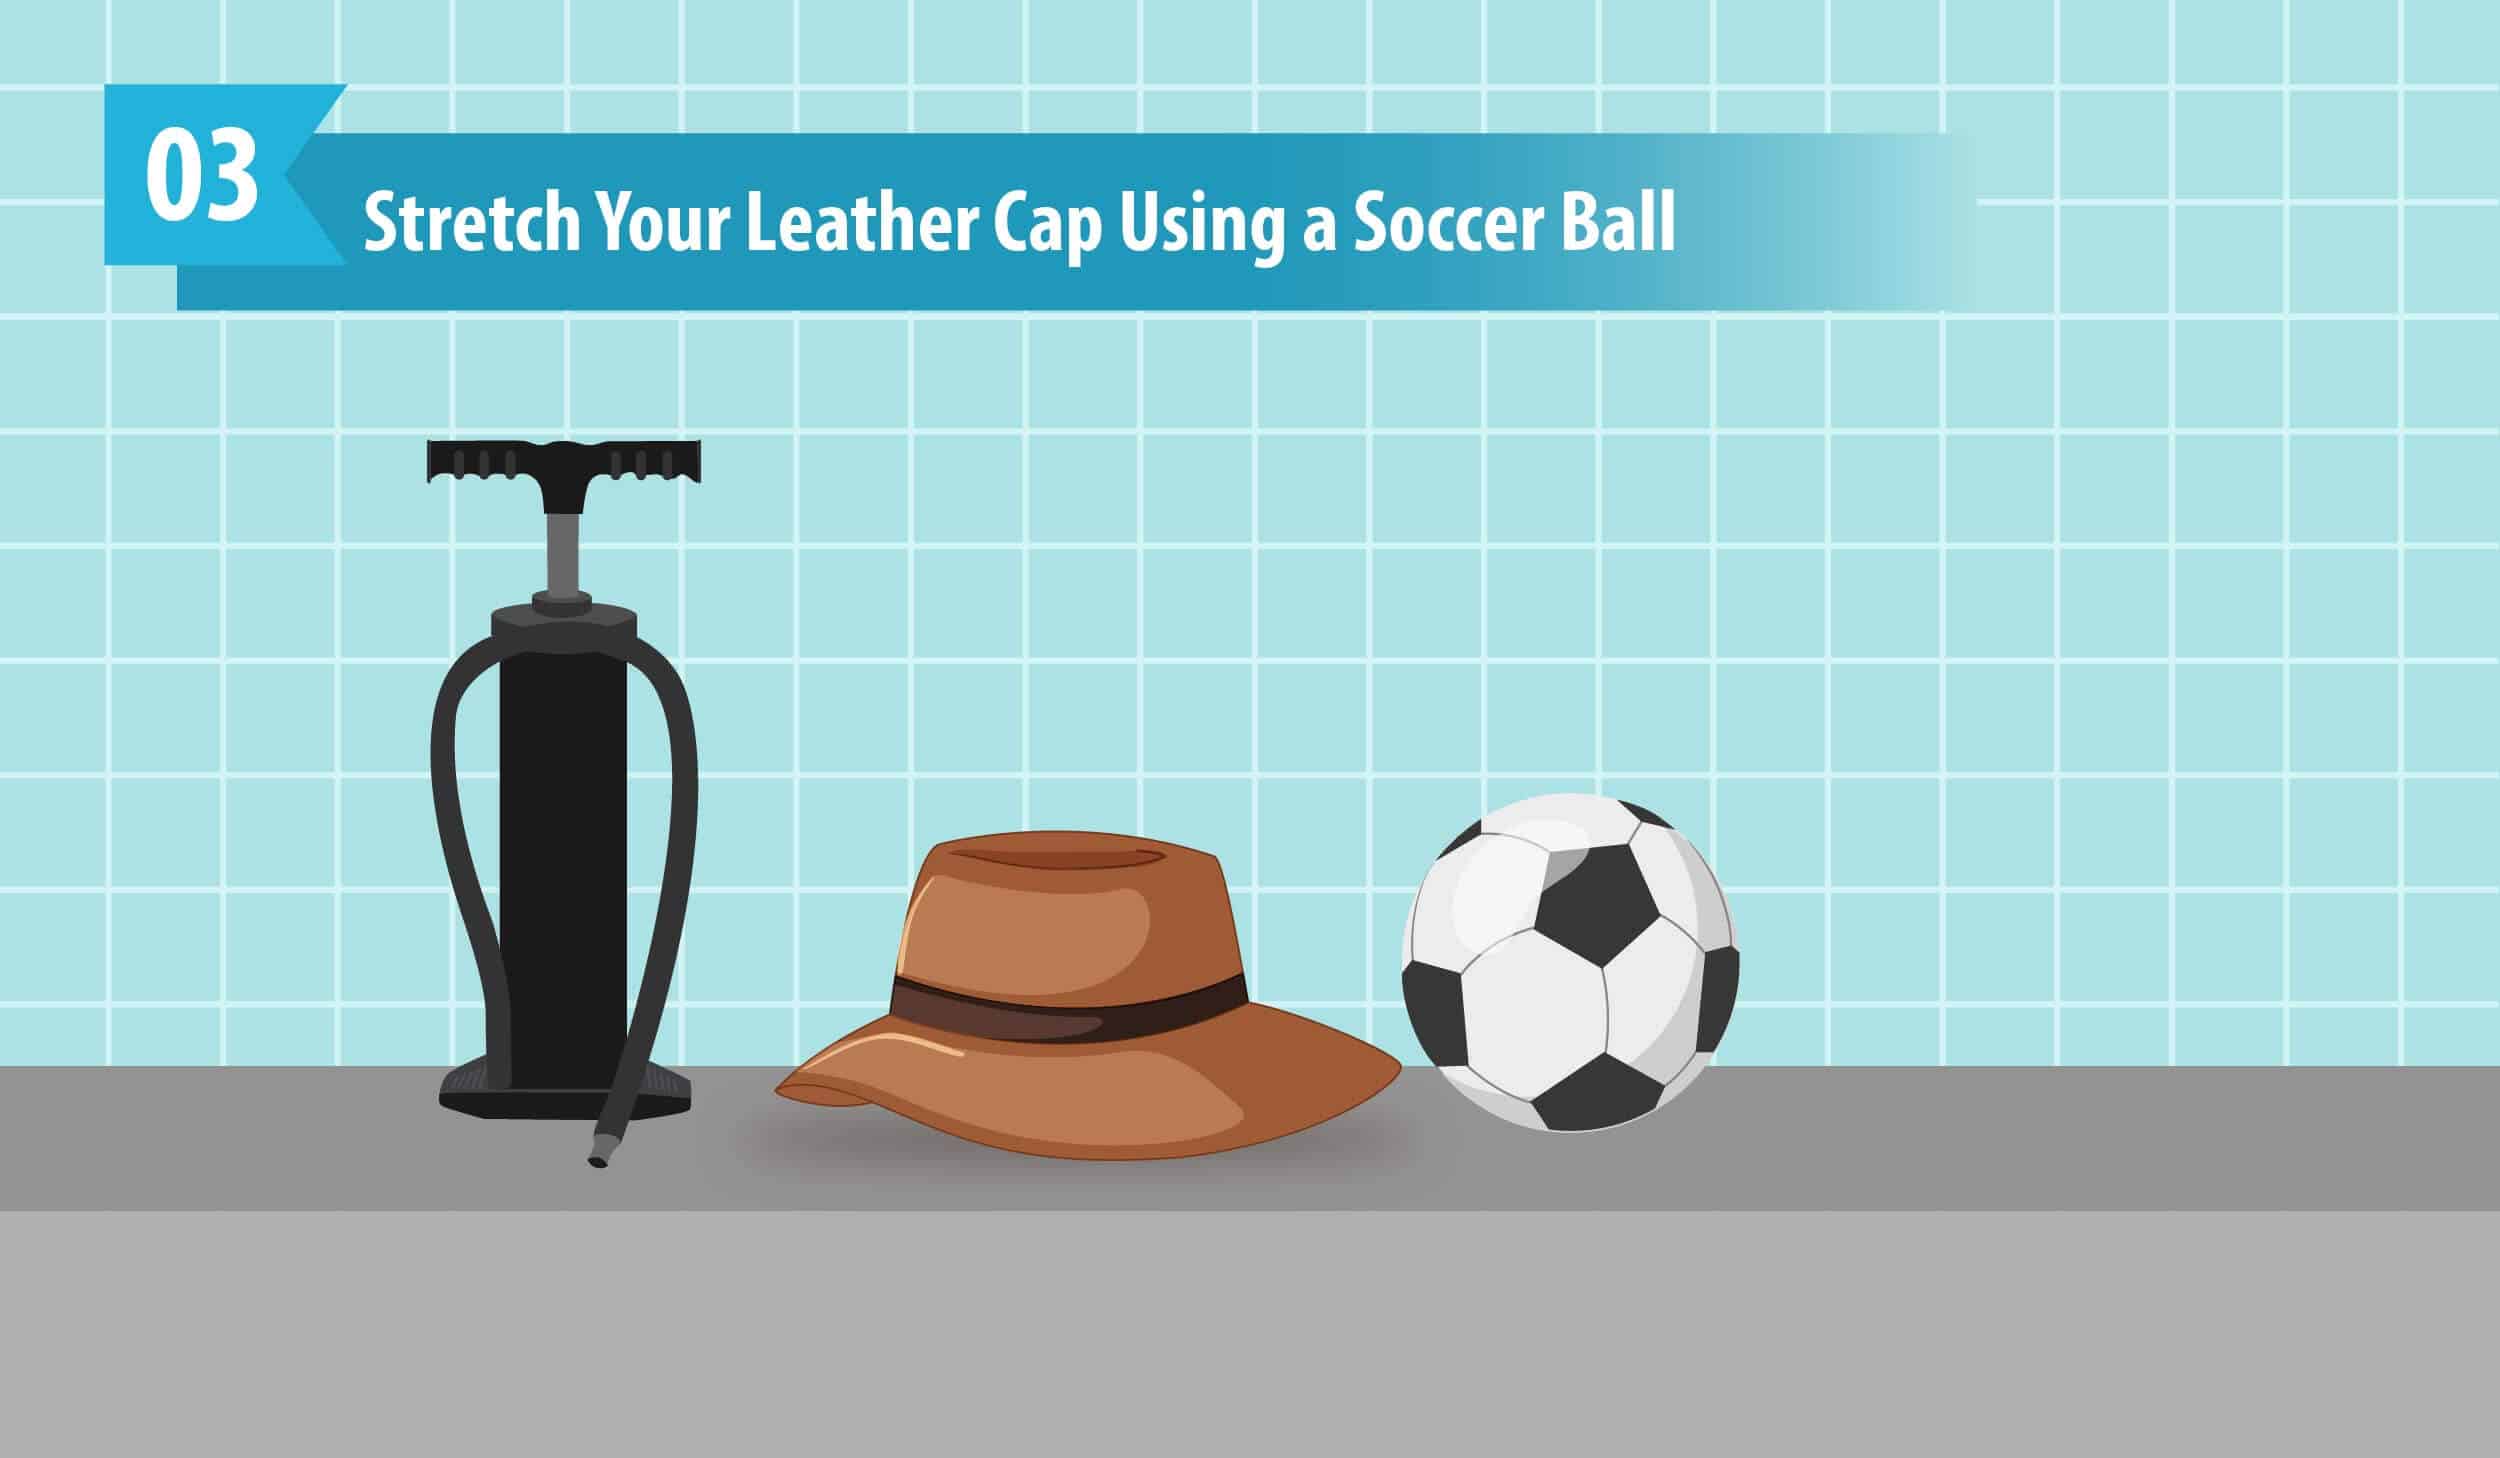 Stretch Your Leather Cap Using a Soccer Ball